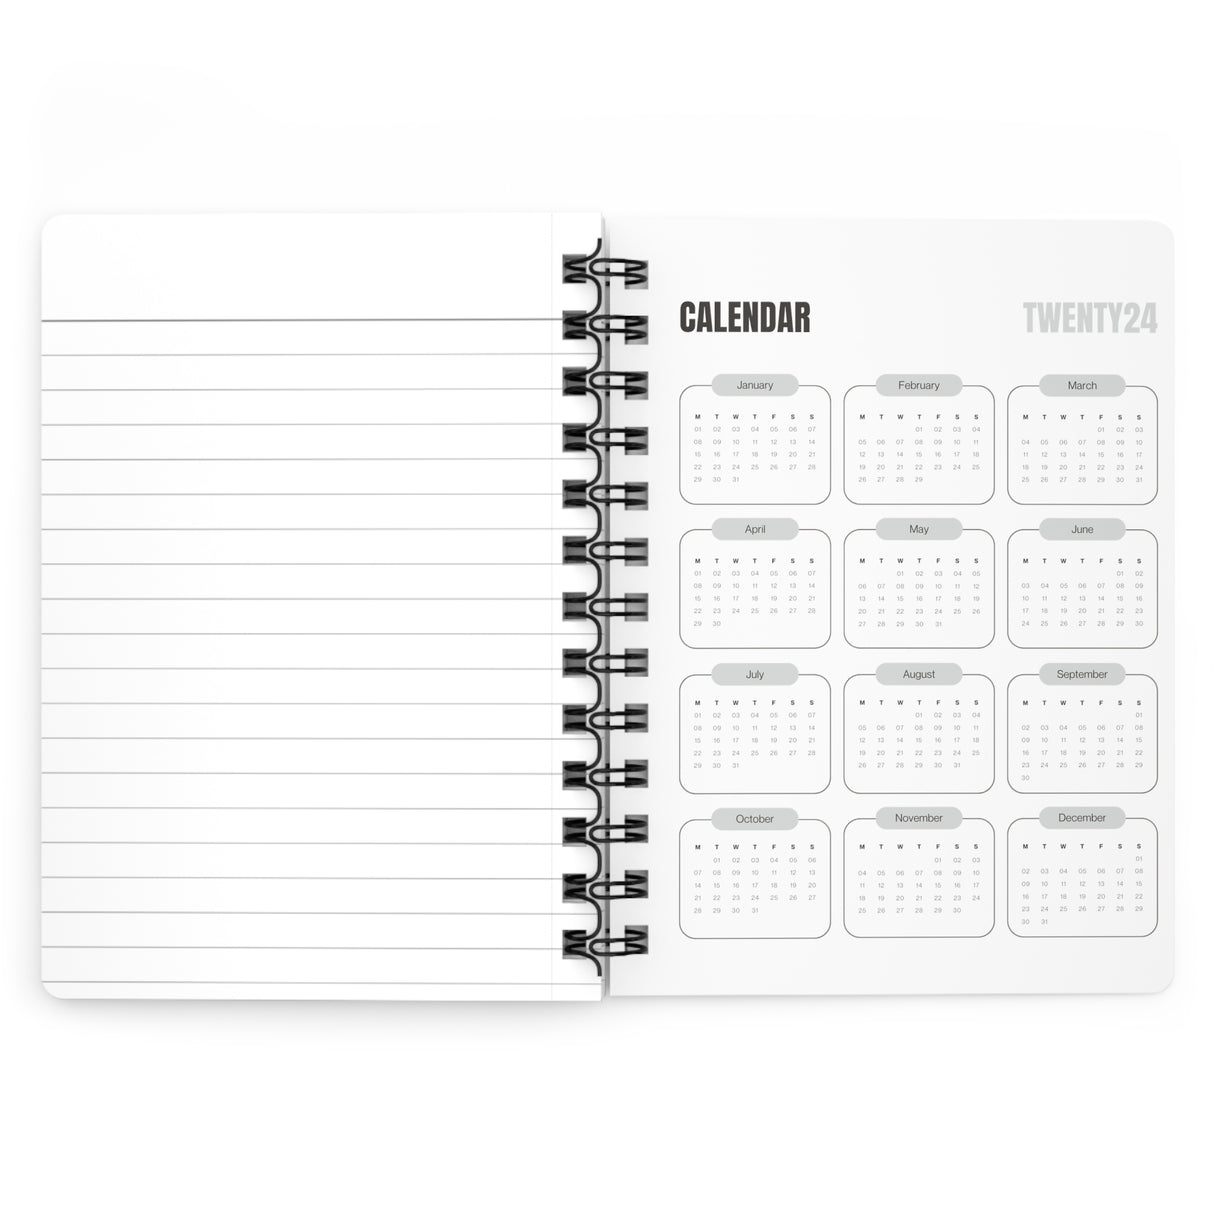 Flossy Pepper Spiral Bound Notebooks and Journals with 2023-2024 Year-at-a-Glance Calendar